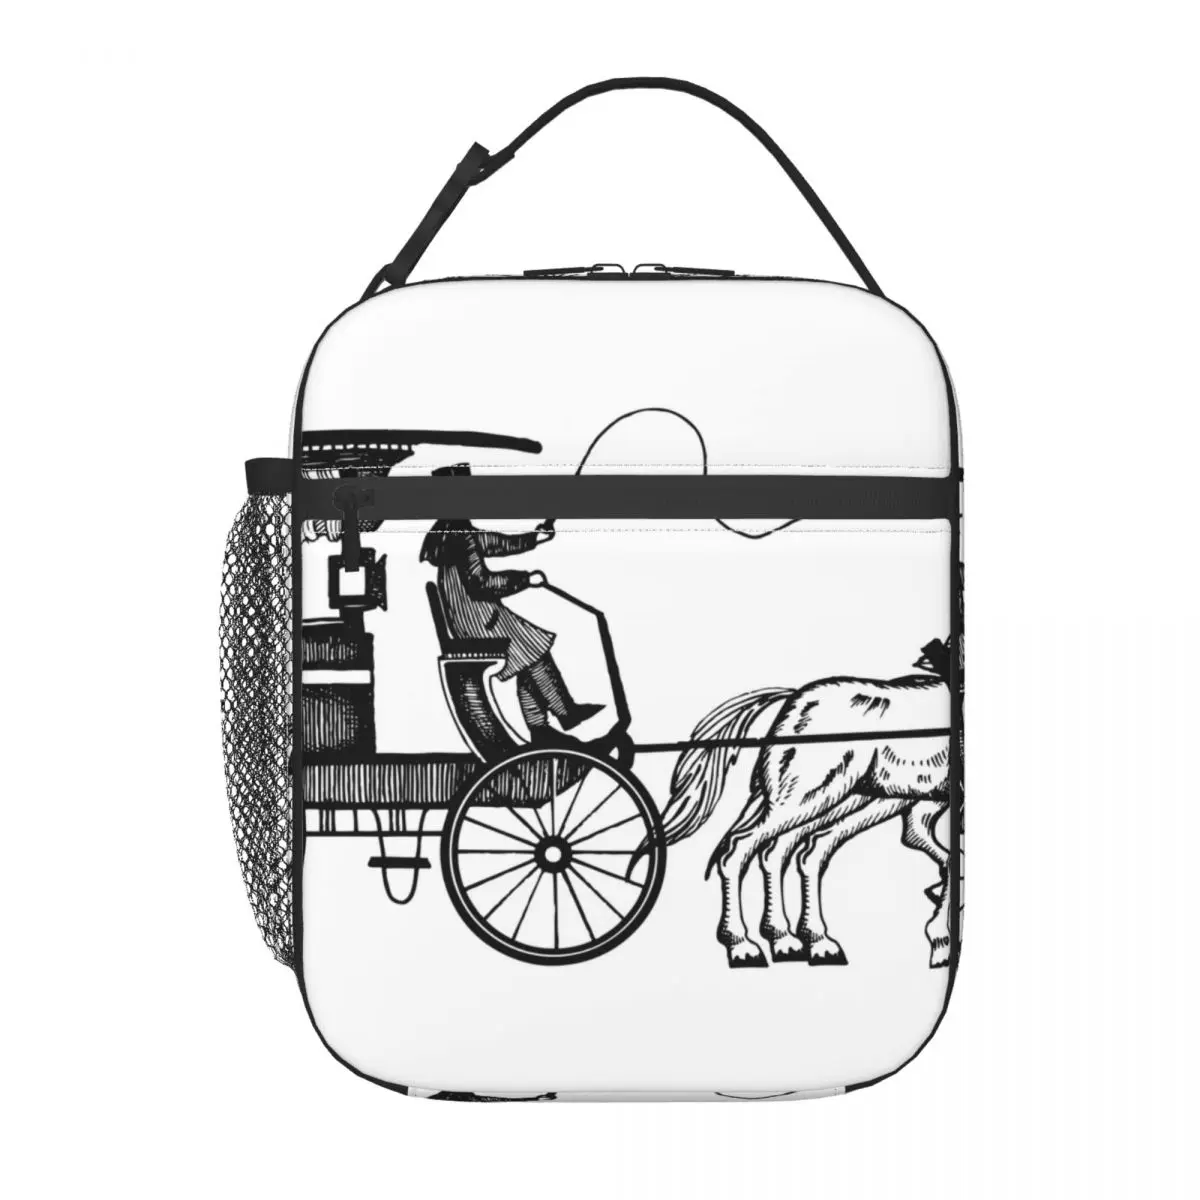 Fresh Keep Lunch New Women Kids Picnic Travel Storage Thermal Insulated Carriage With Horses Raster